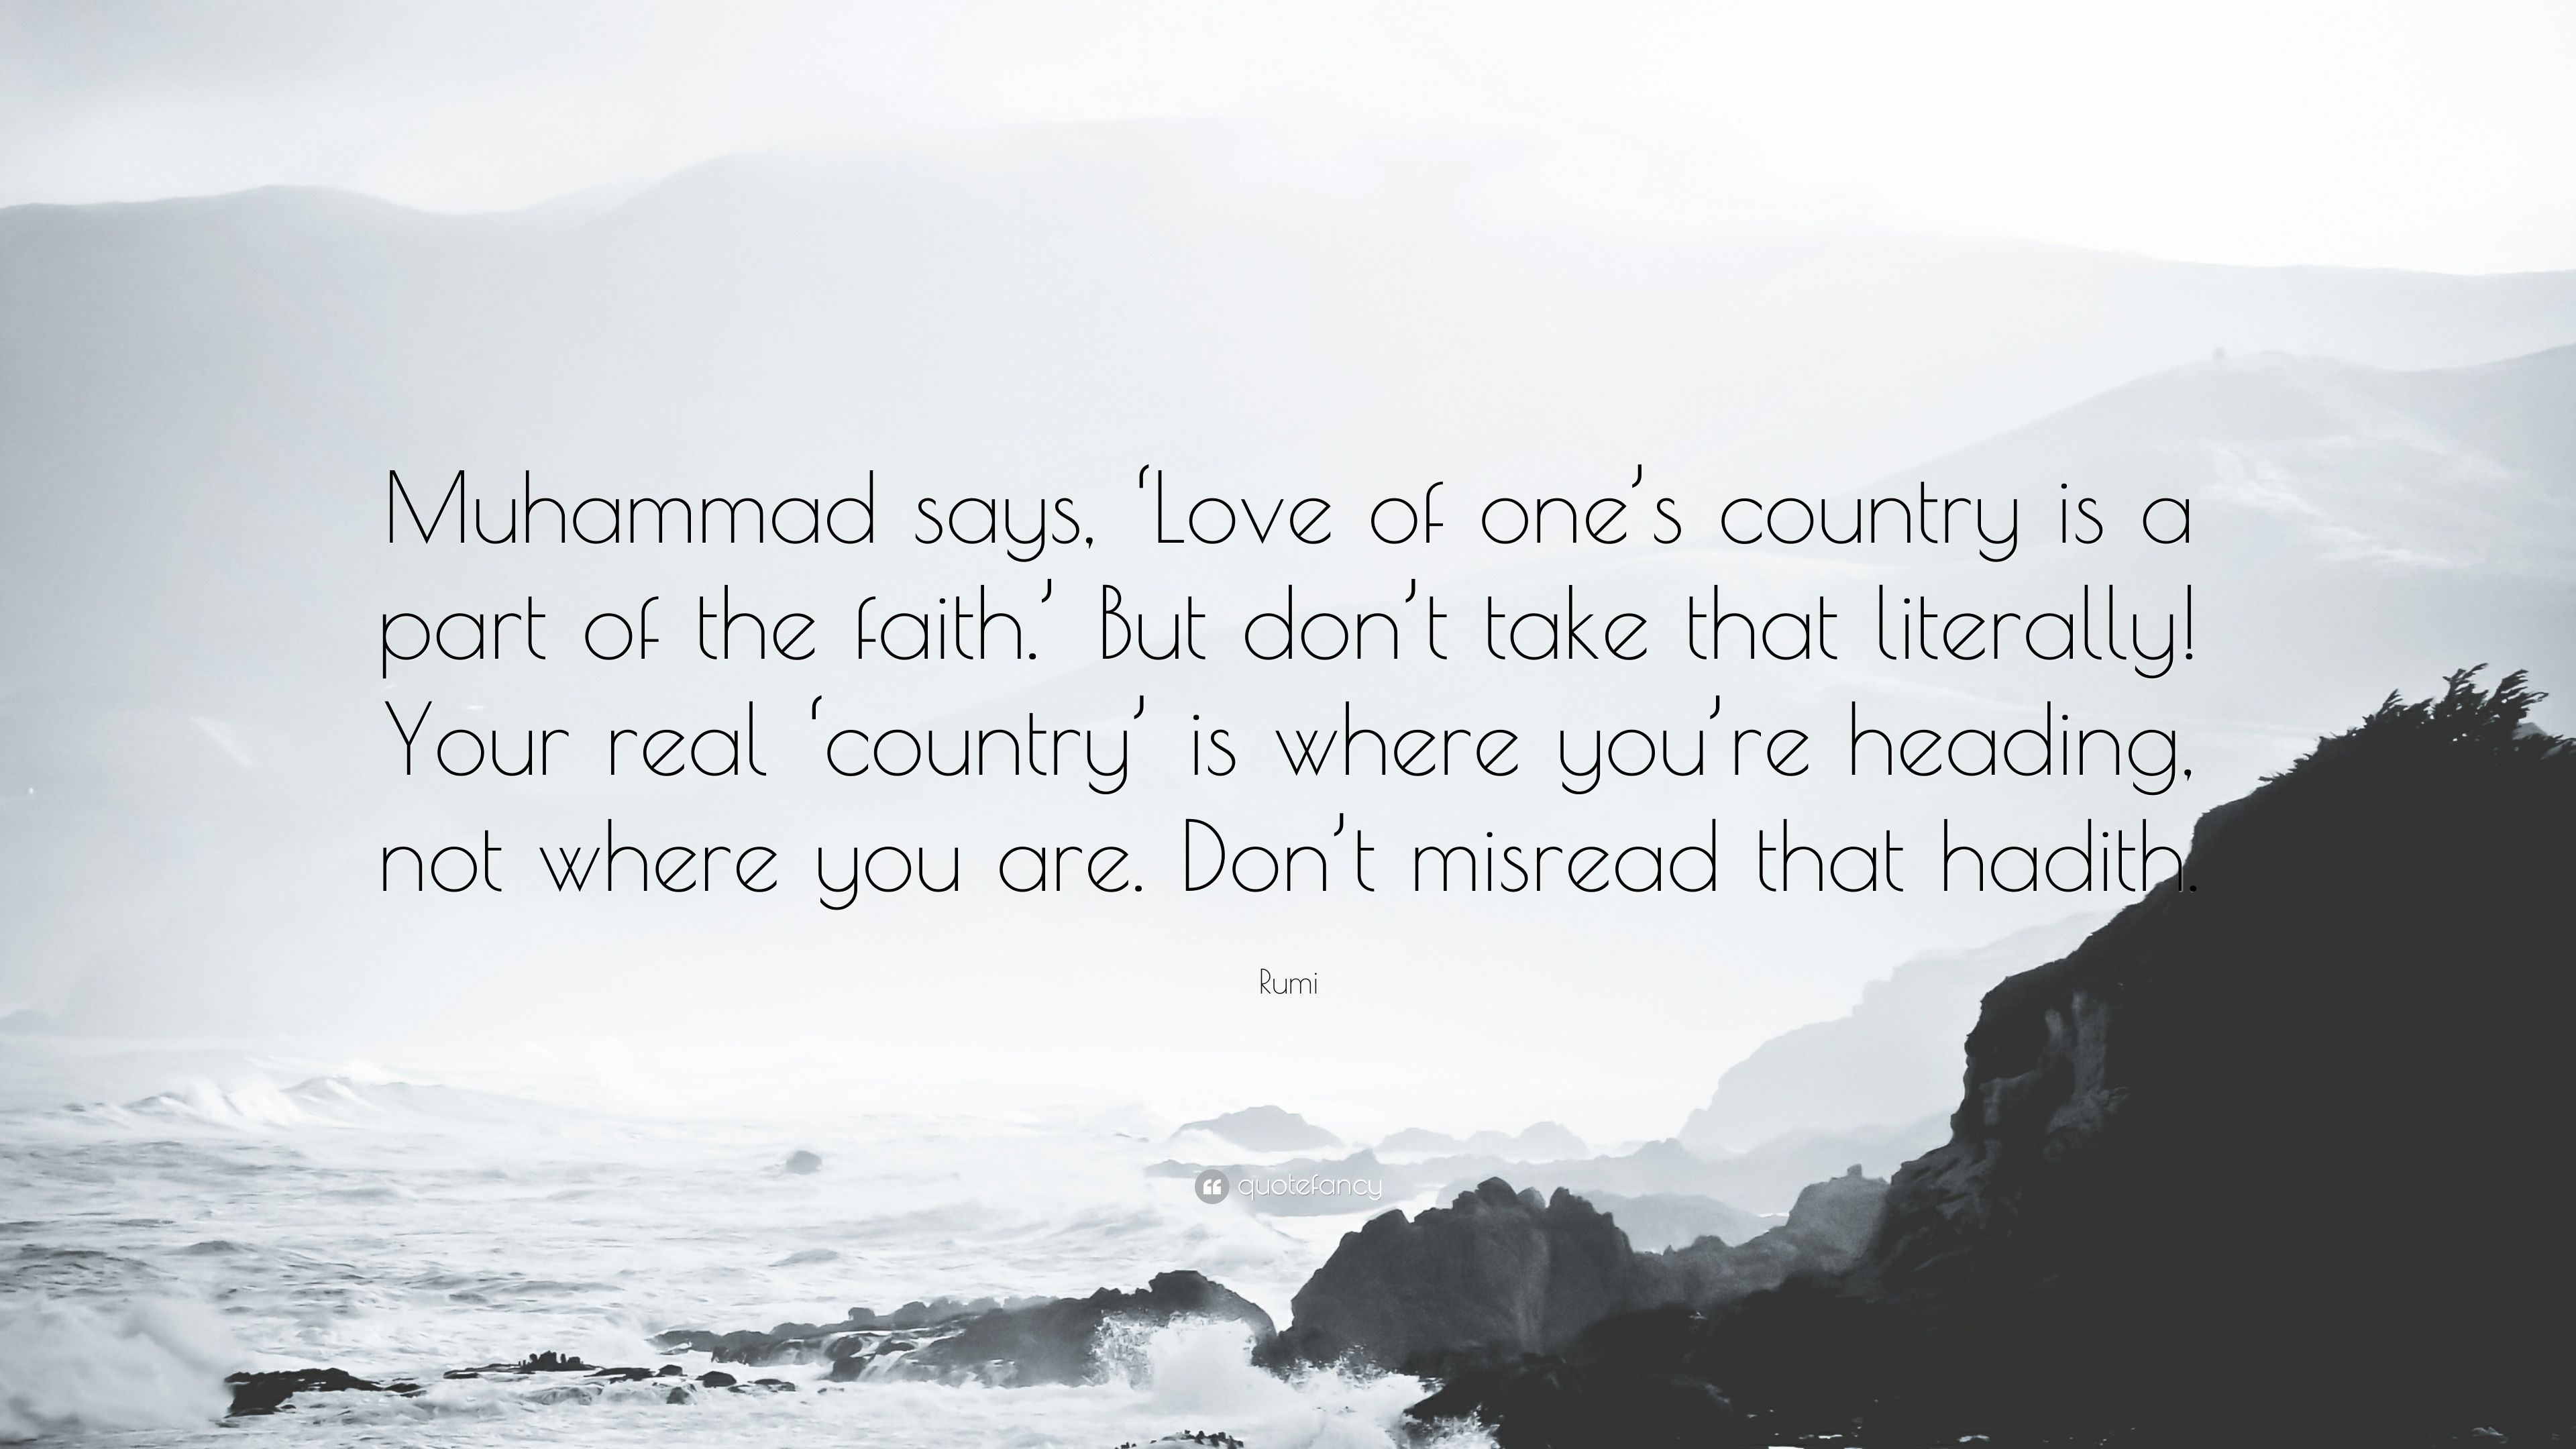 Rumi Quote: “Muhammad says, 'Love of one's country is a part of the faith.' But don't take that literally! Your real 'country' is whe.” (10 wallpaper)